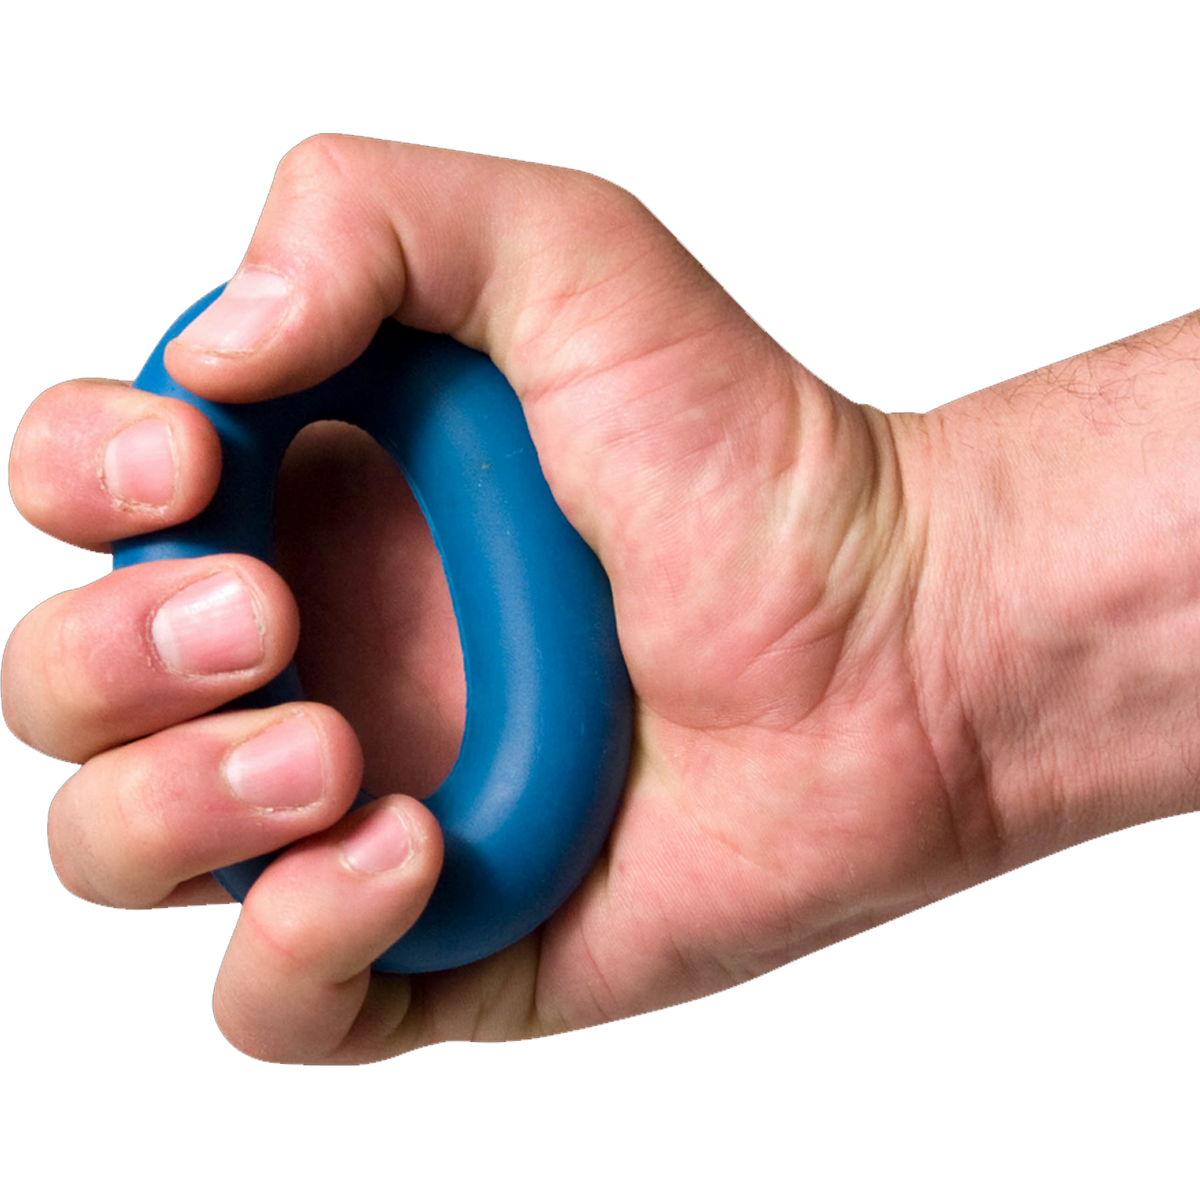 Forearm Trainer alternate view